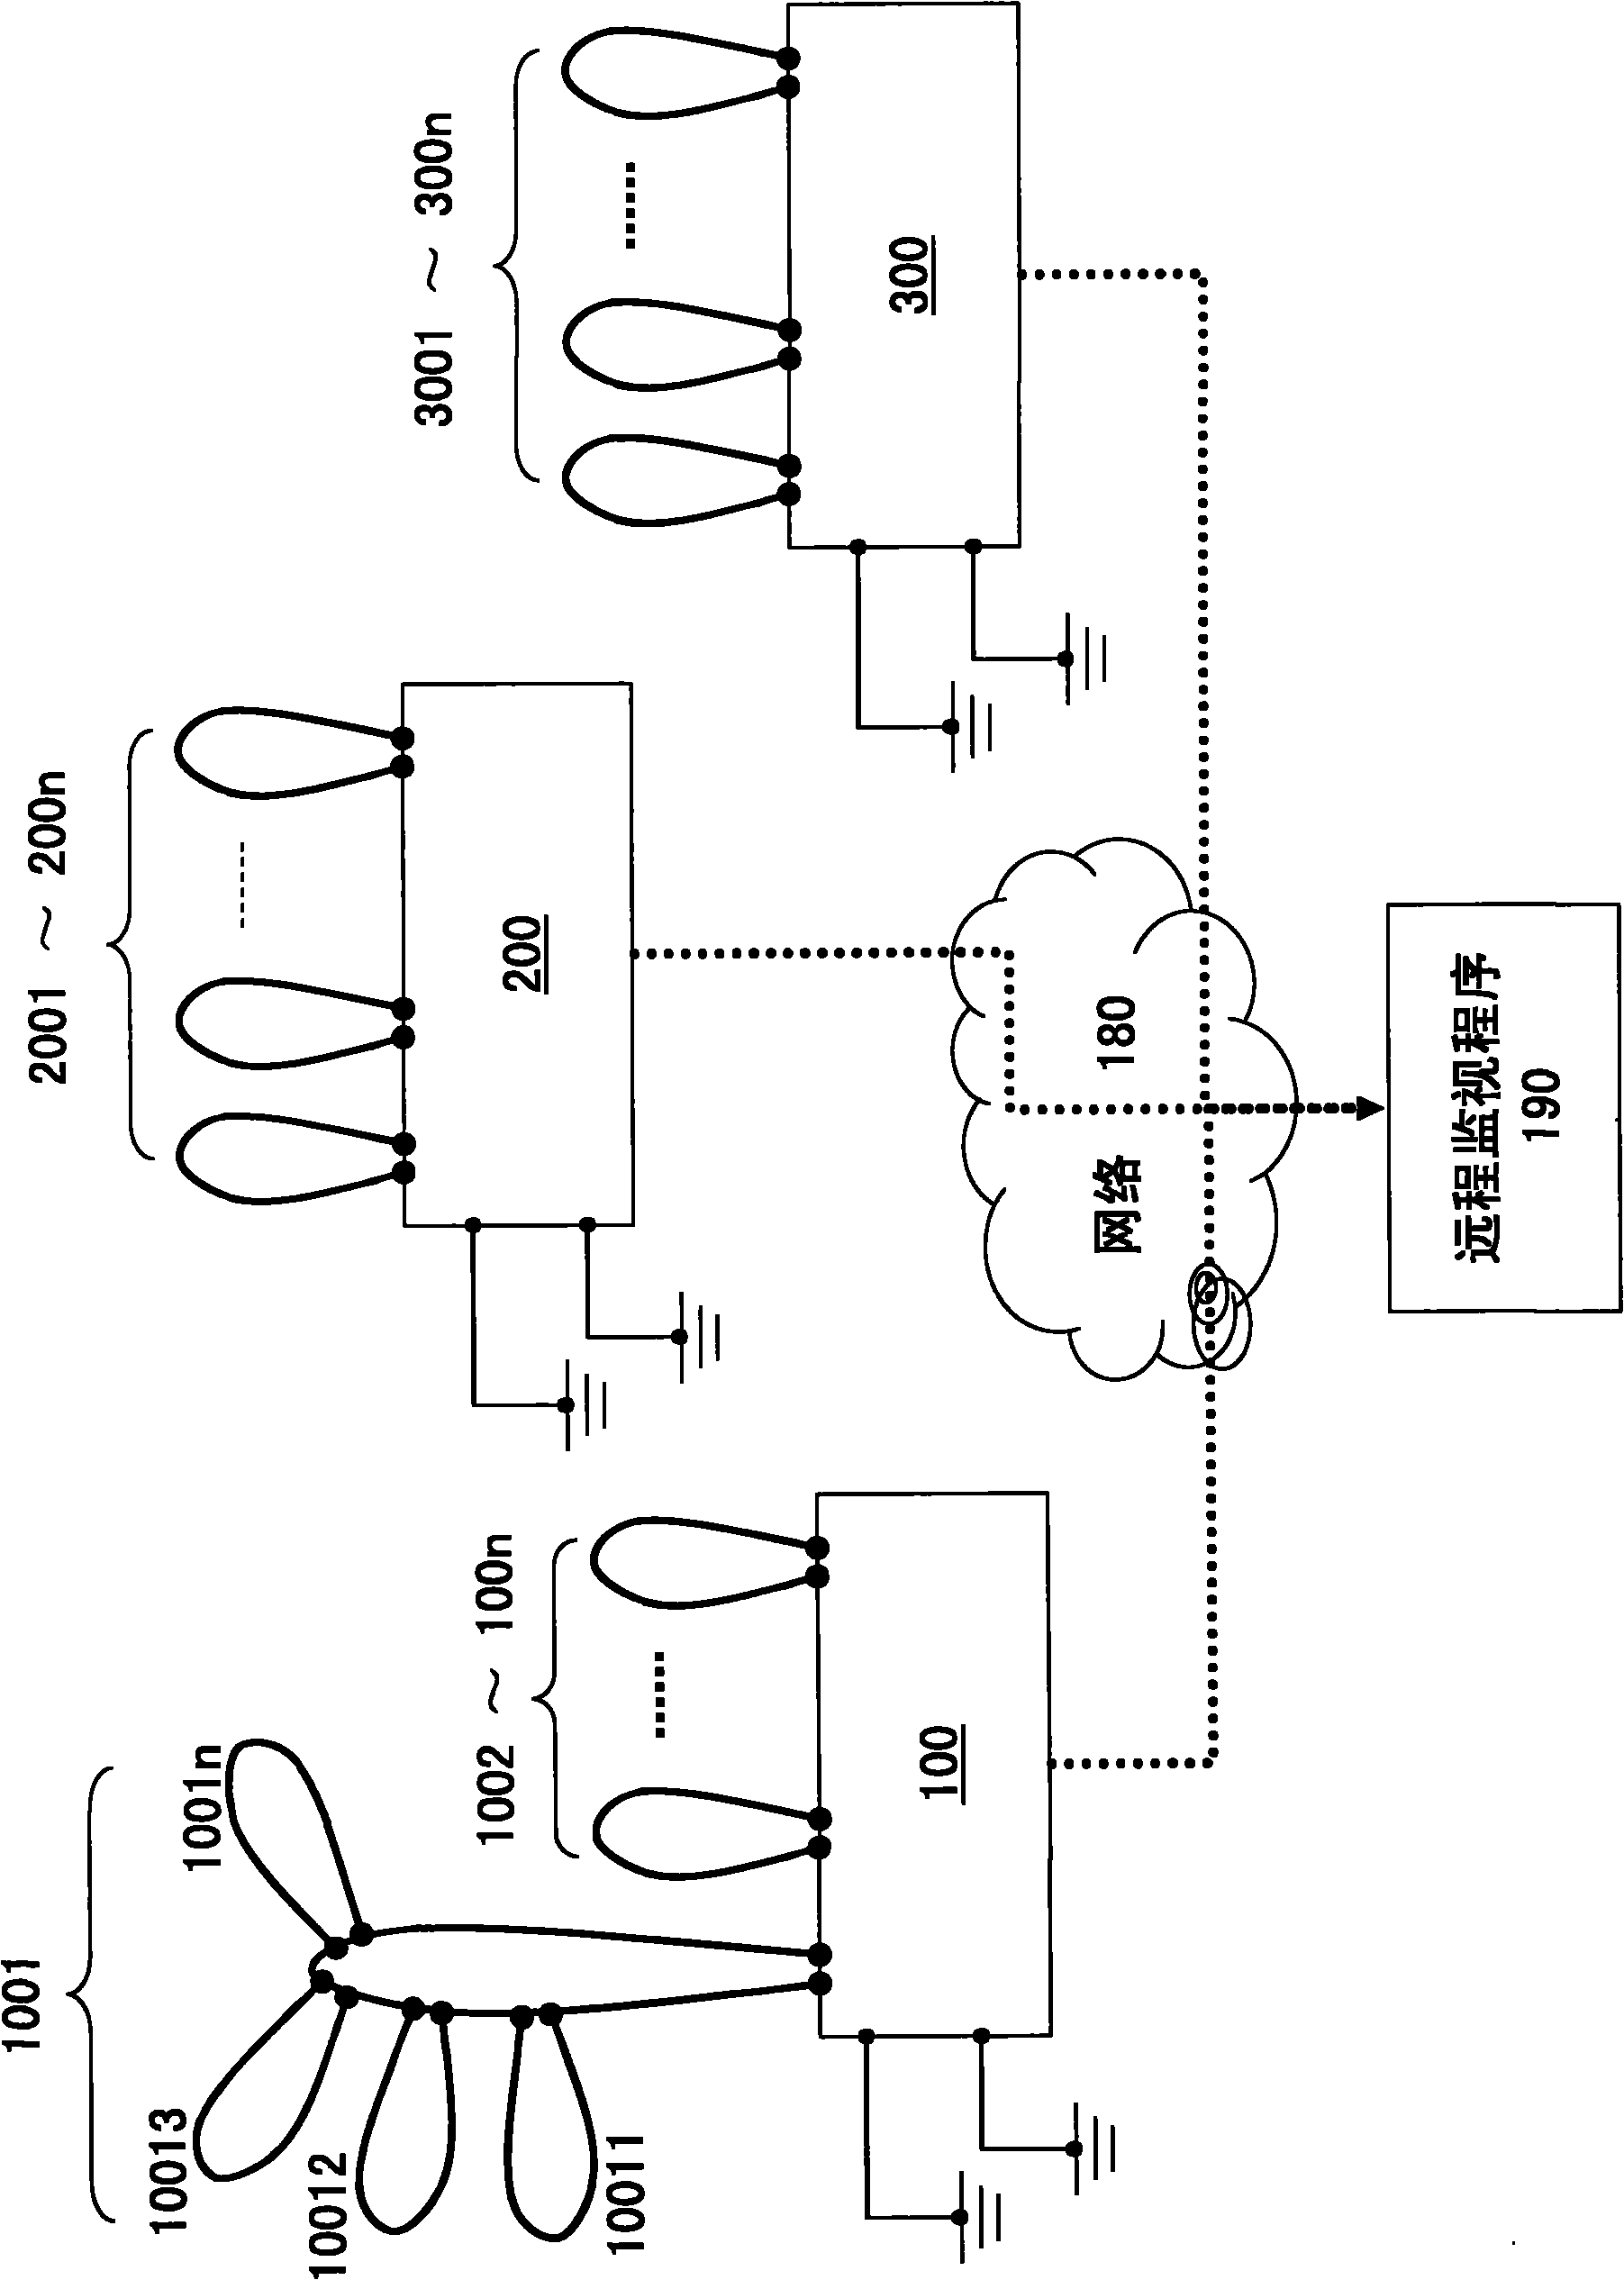 Automatic electrostatic discharge detection system